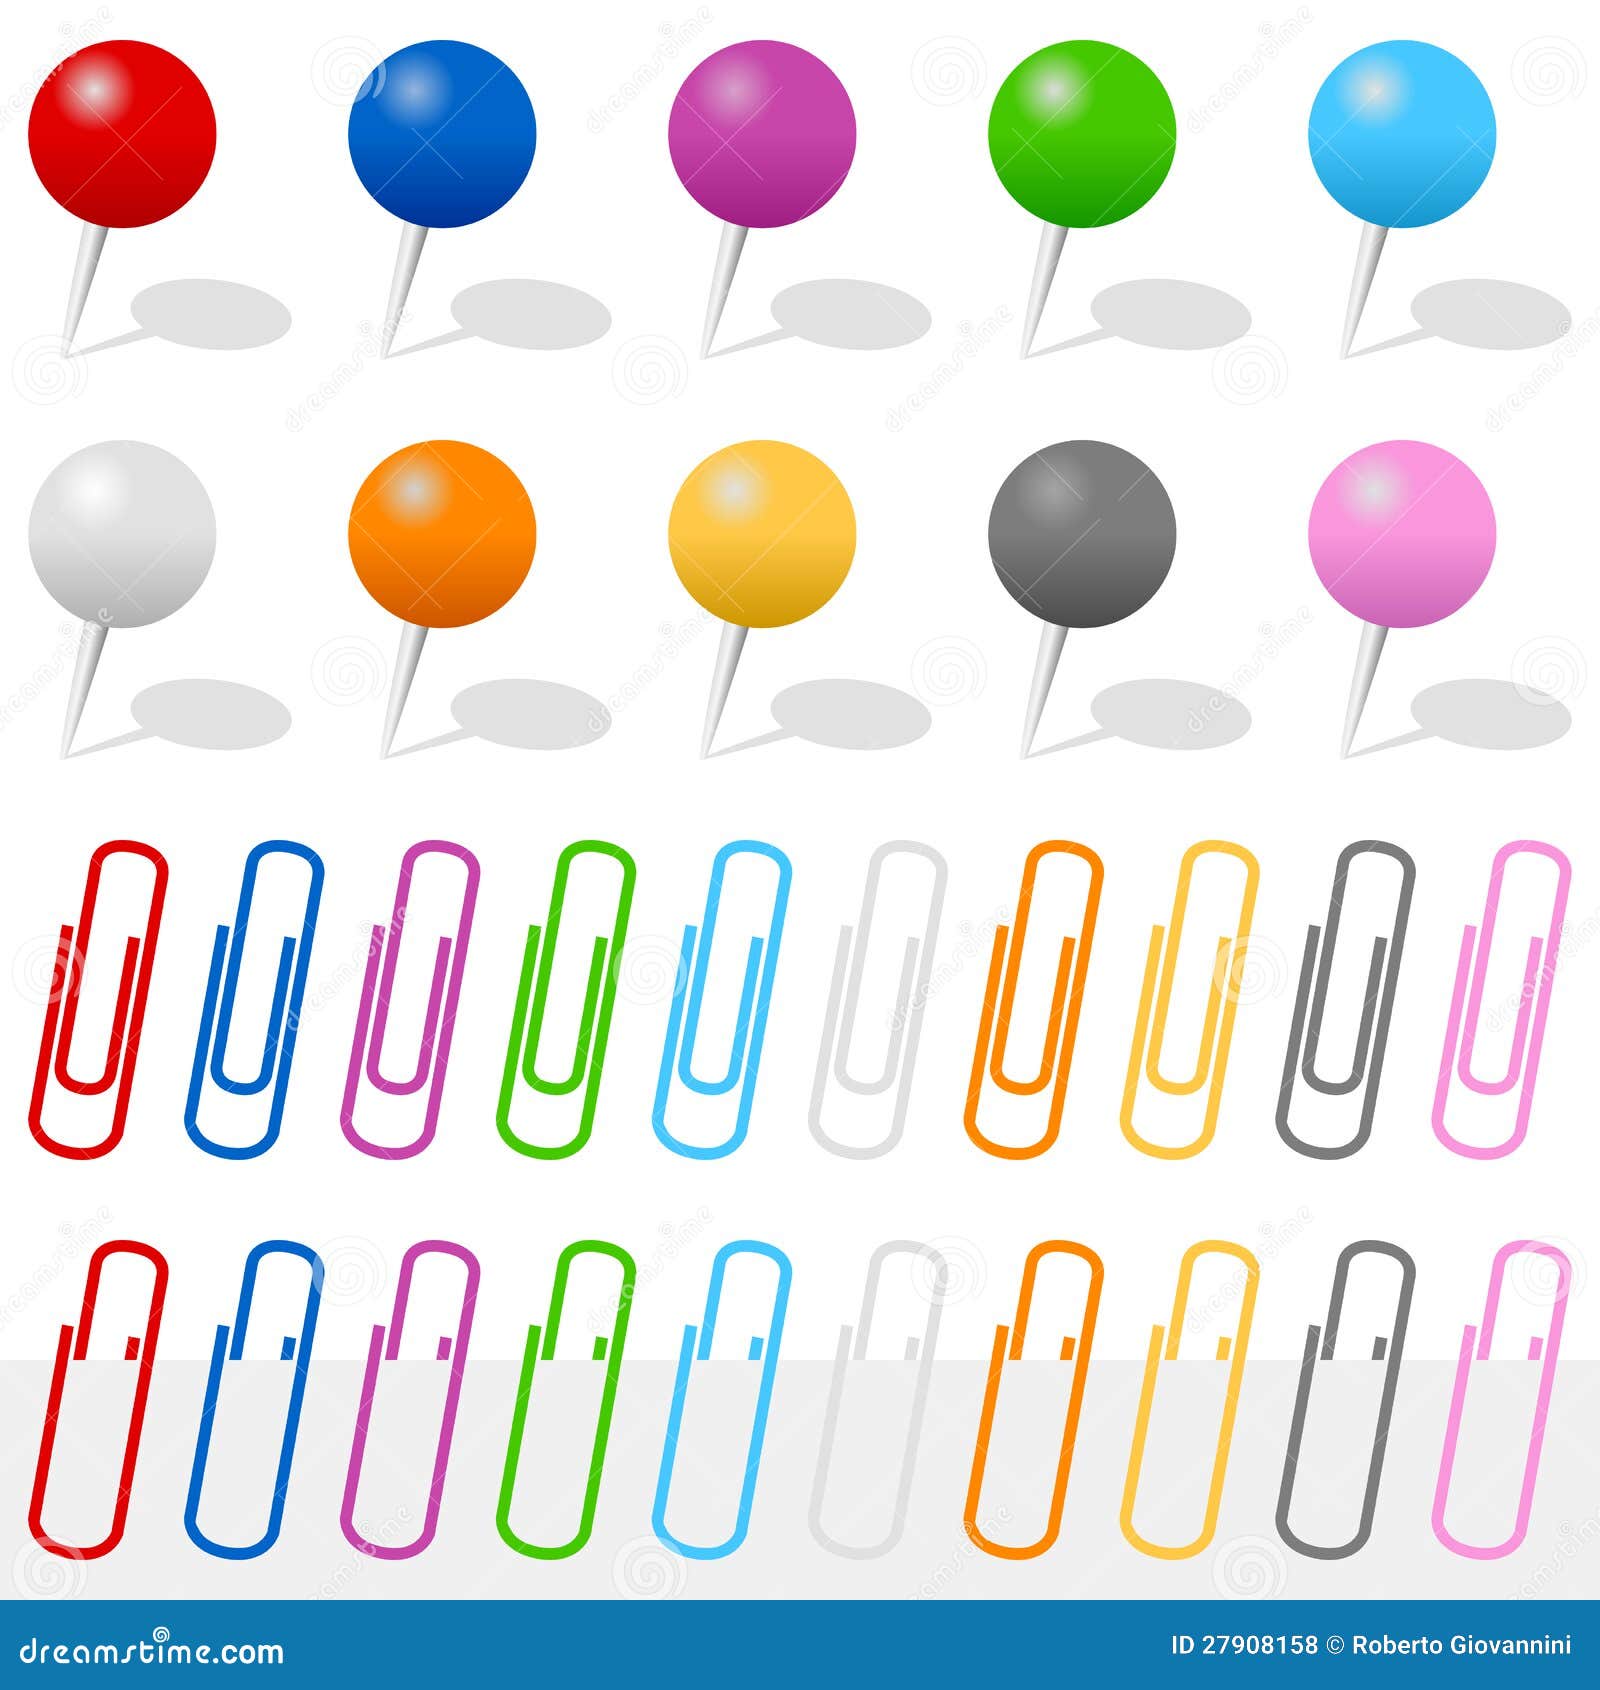 push pins and paper clips set